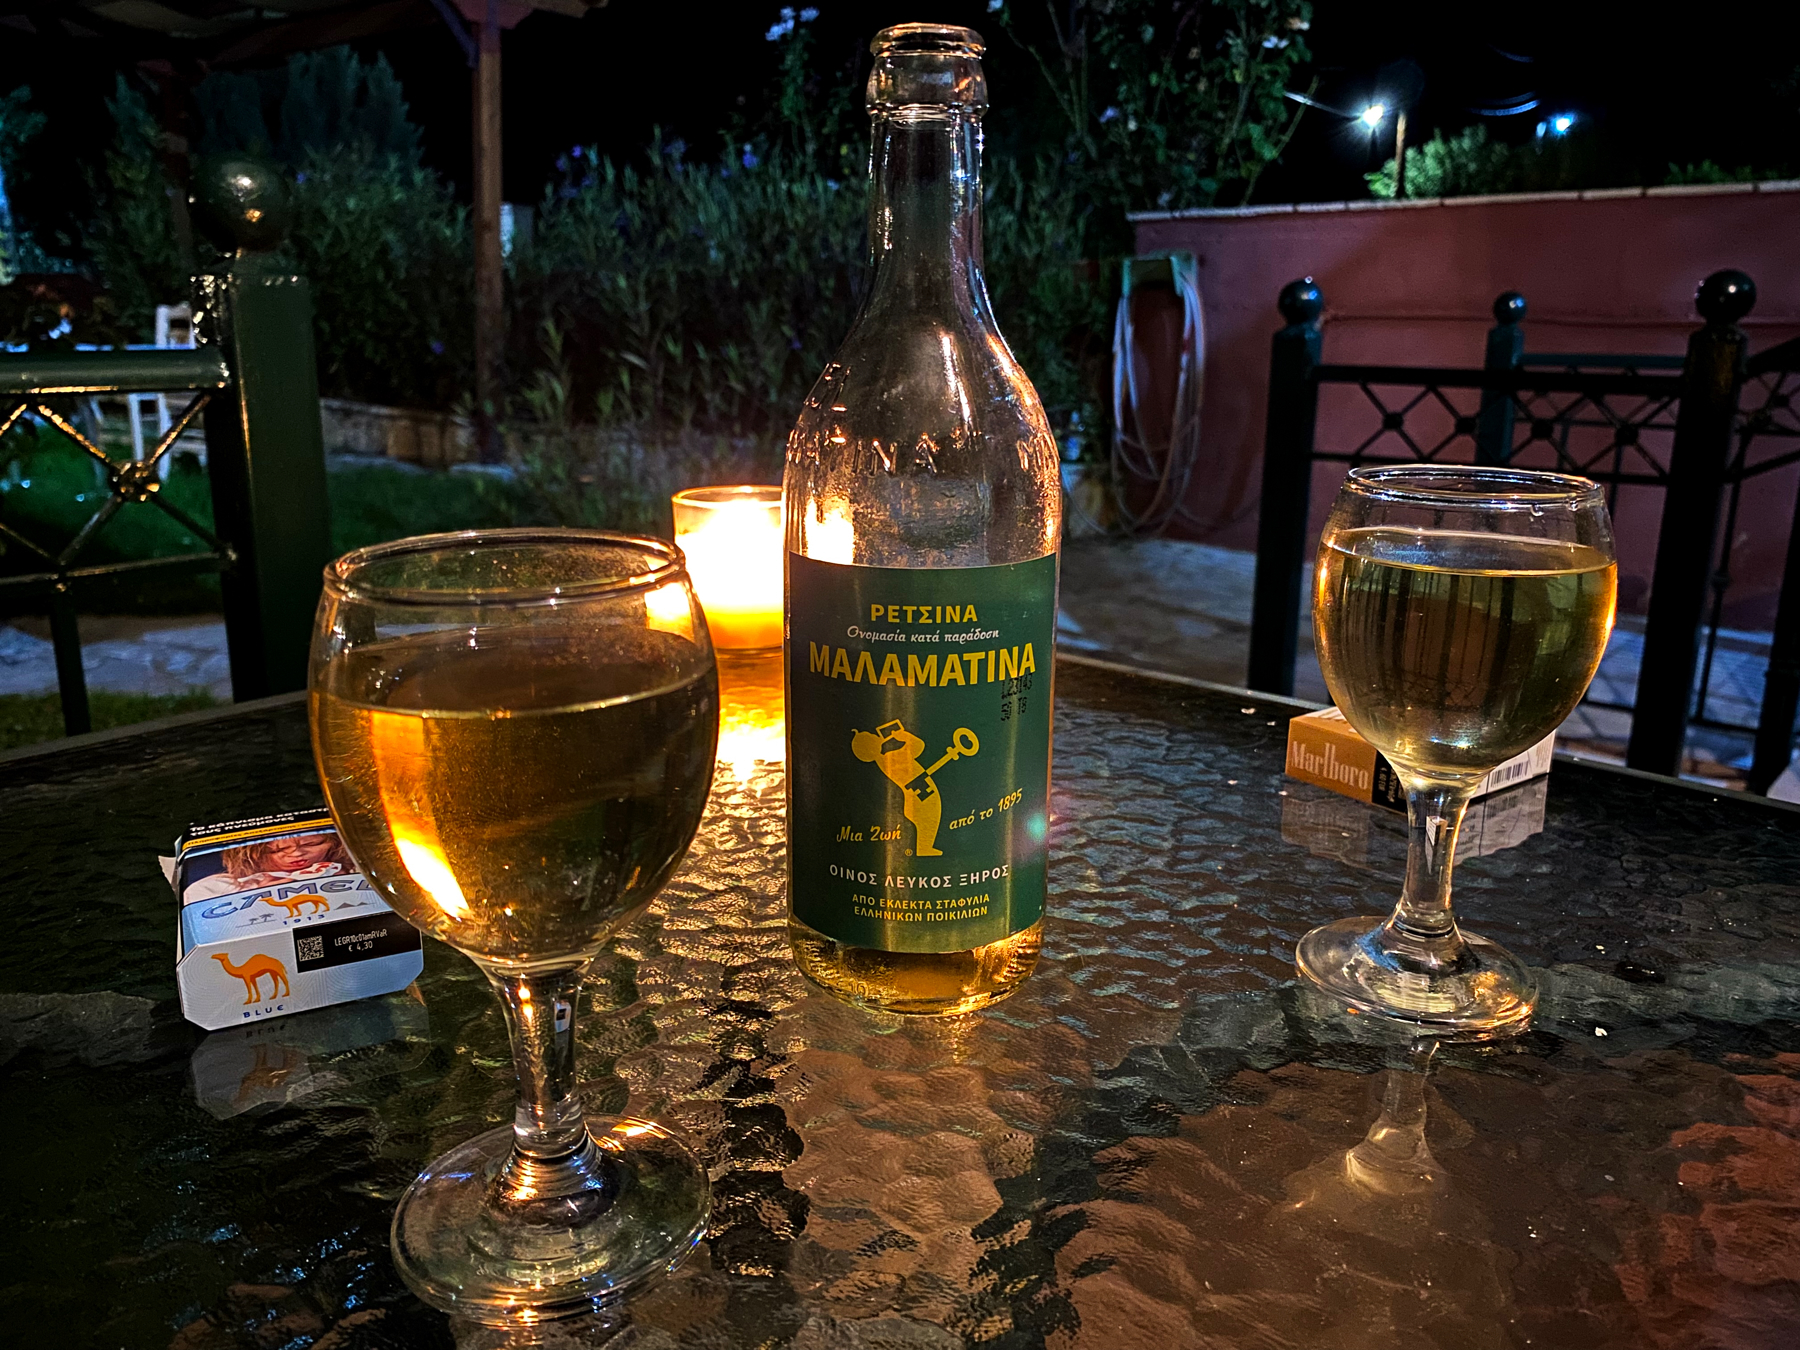 Two glasses of white wine and a bottle on a glass table illuminated by a candle behind them